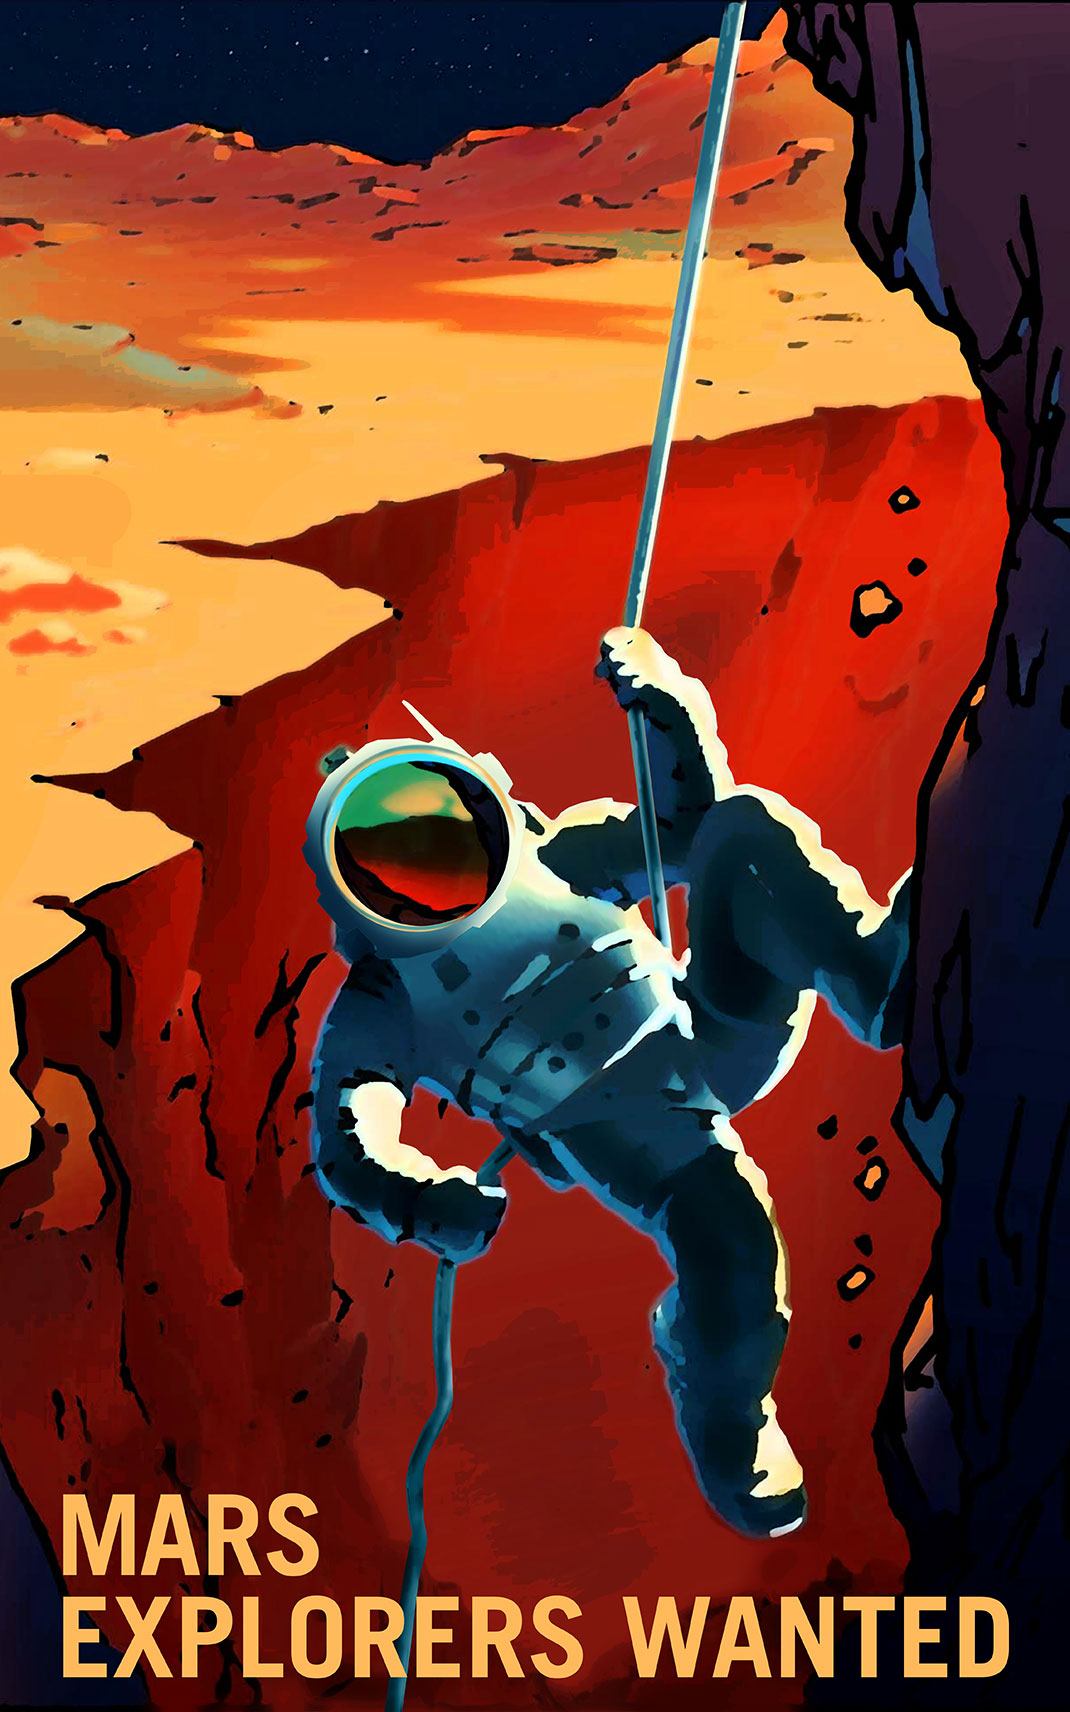 NASA Recruitment Posters Will Inspire You To Conquer Mars